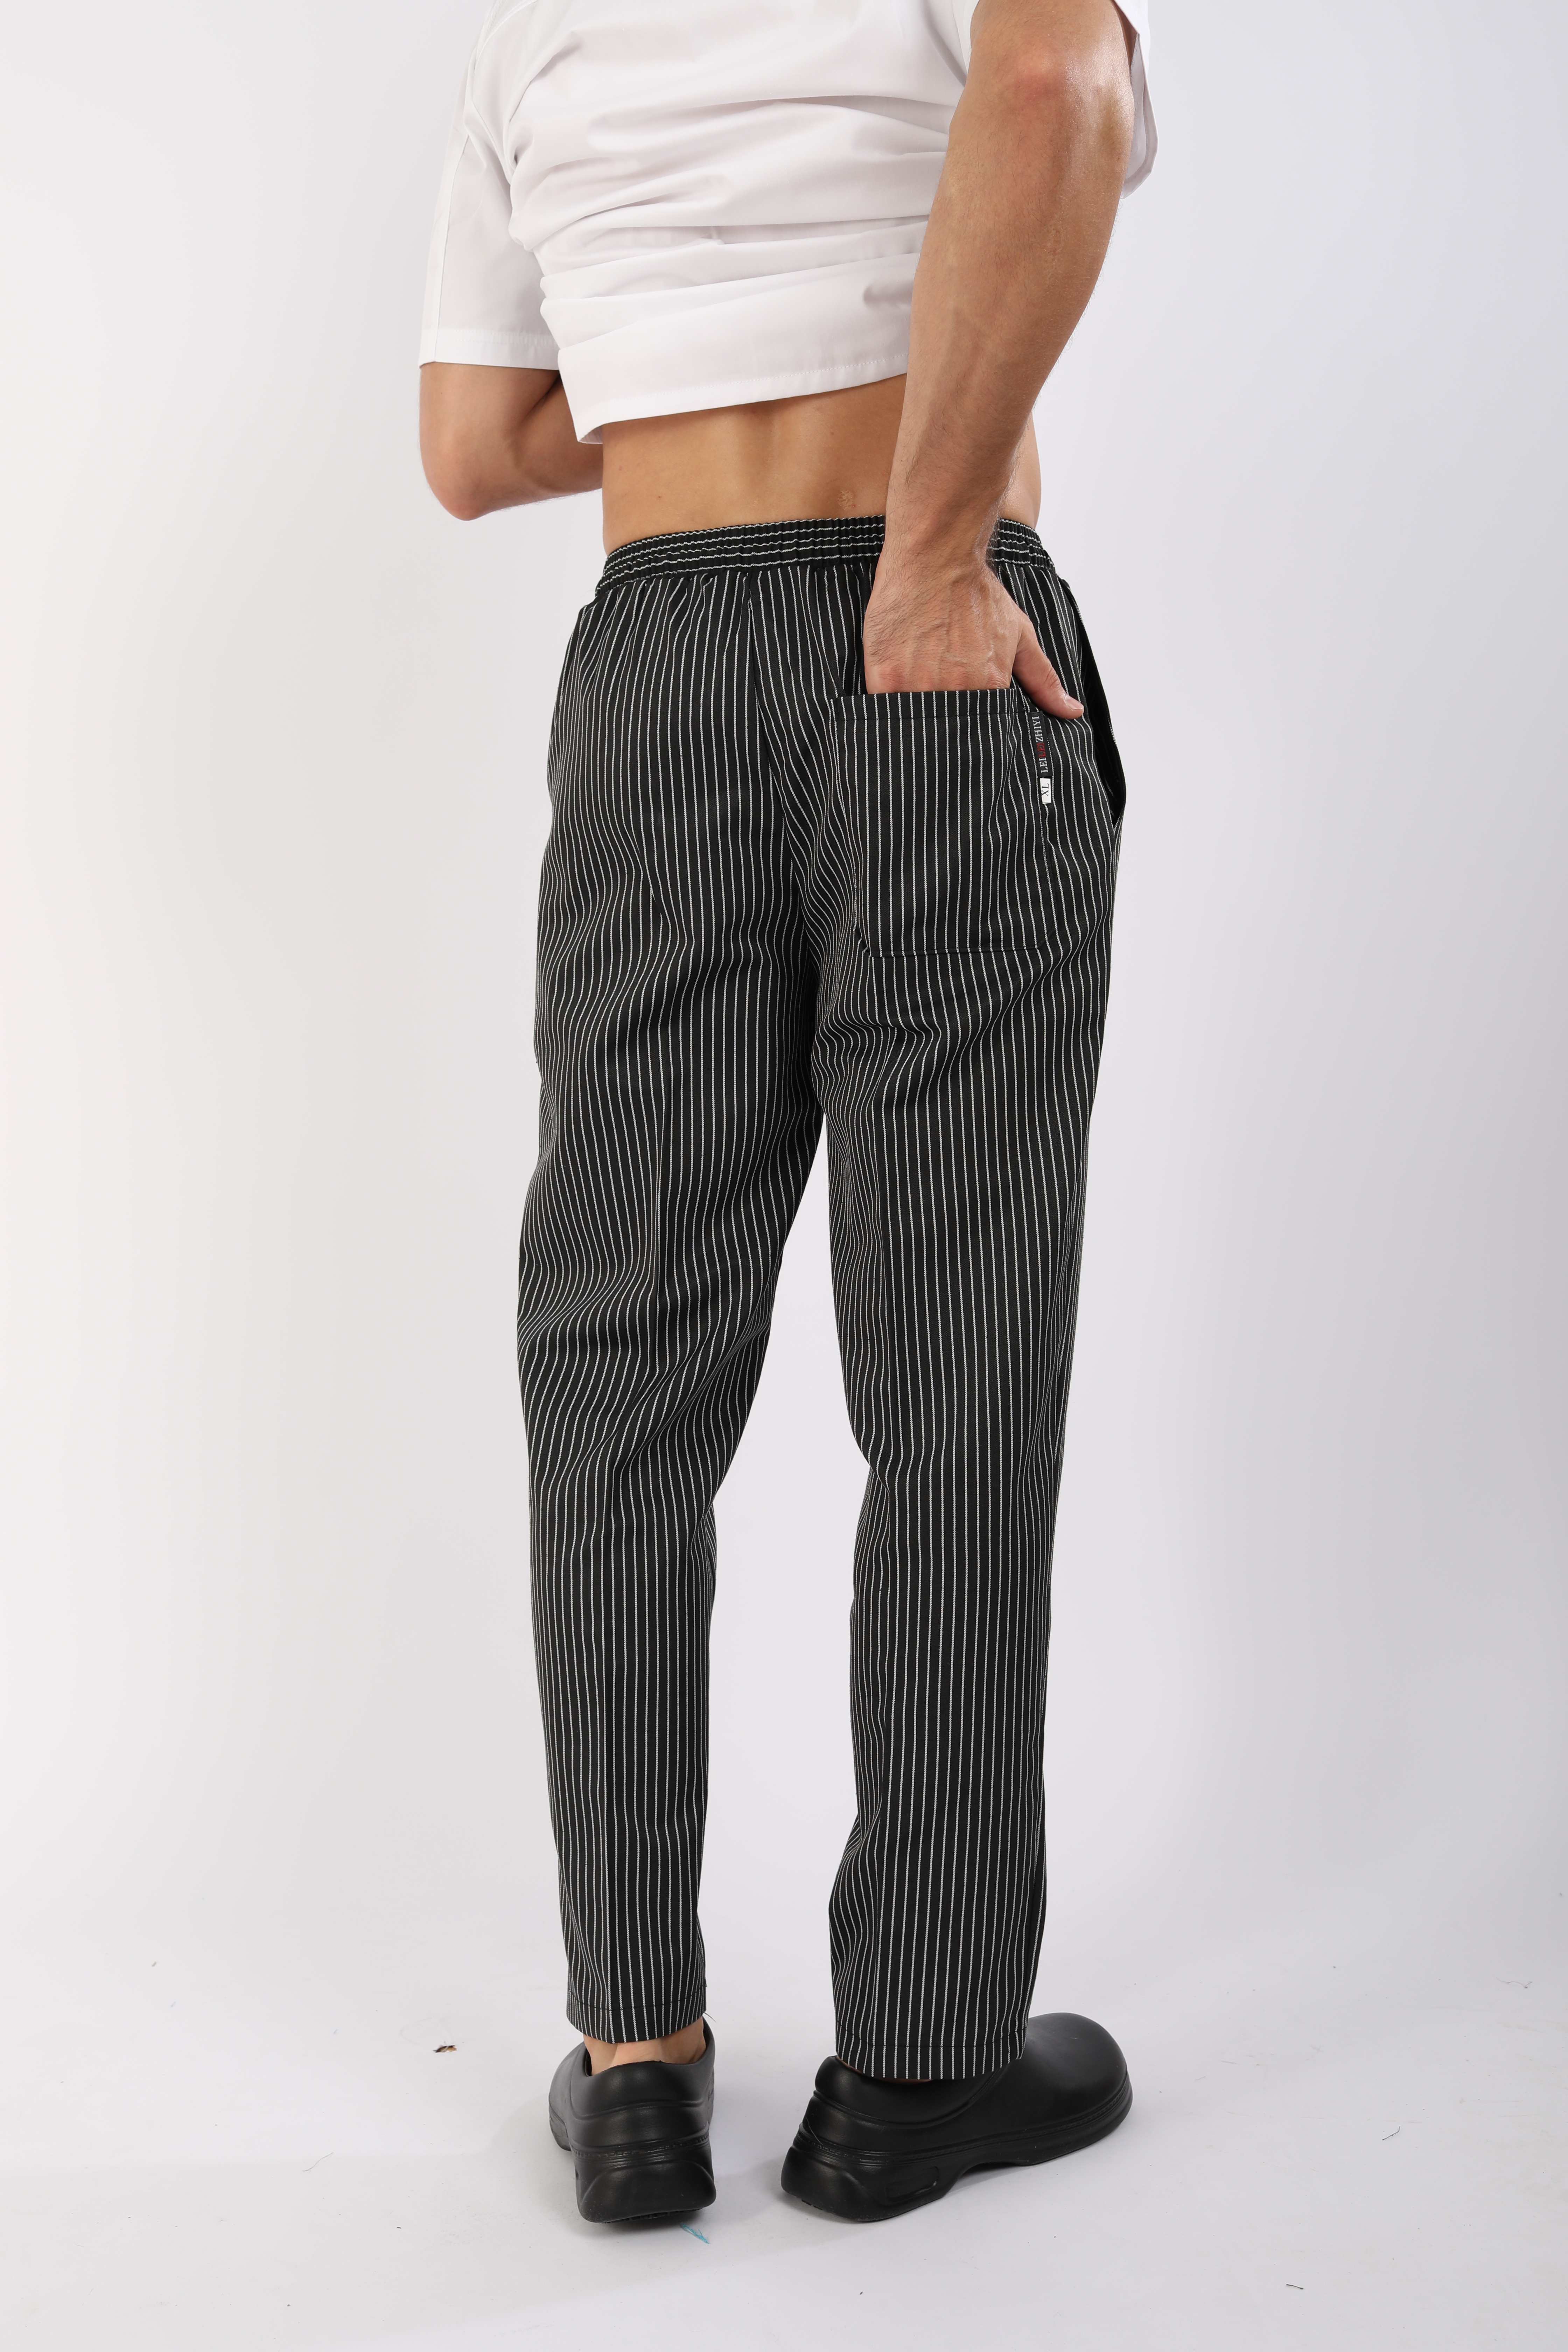 Chef Trousers LG-YBCW-1010